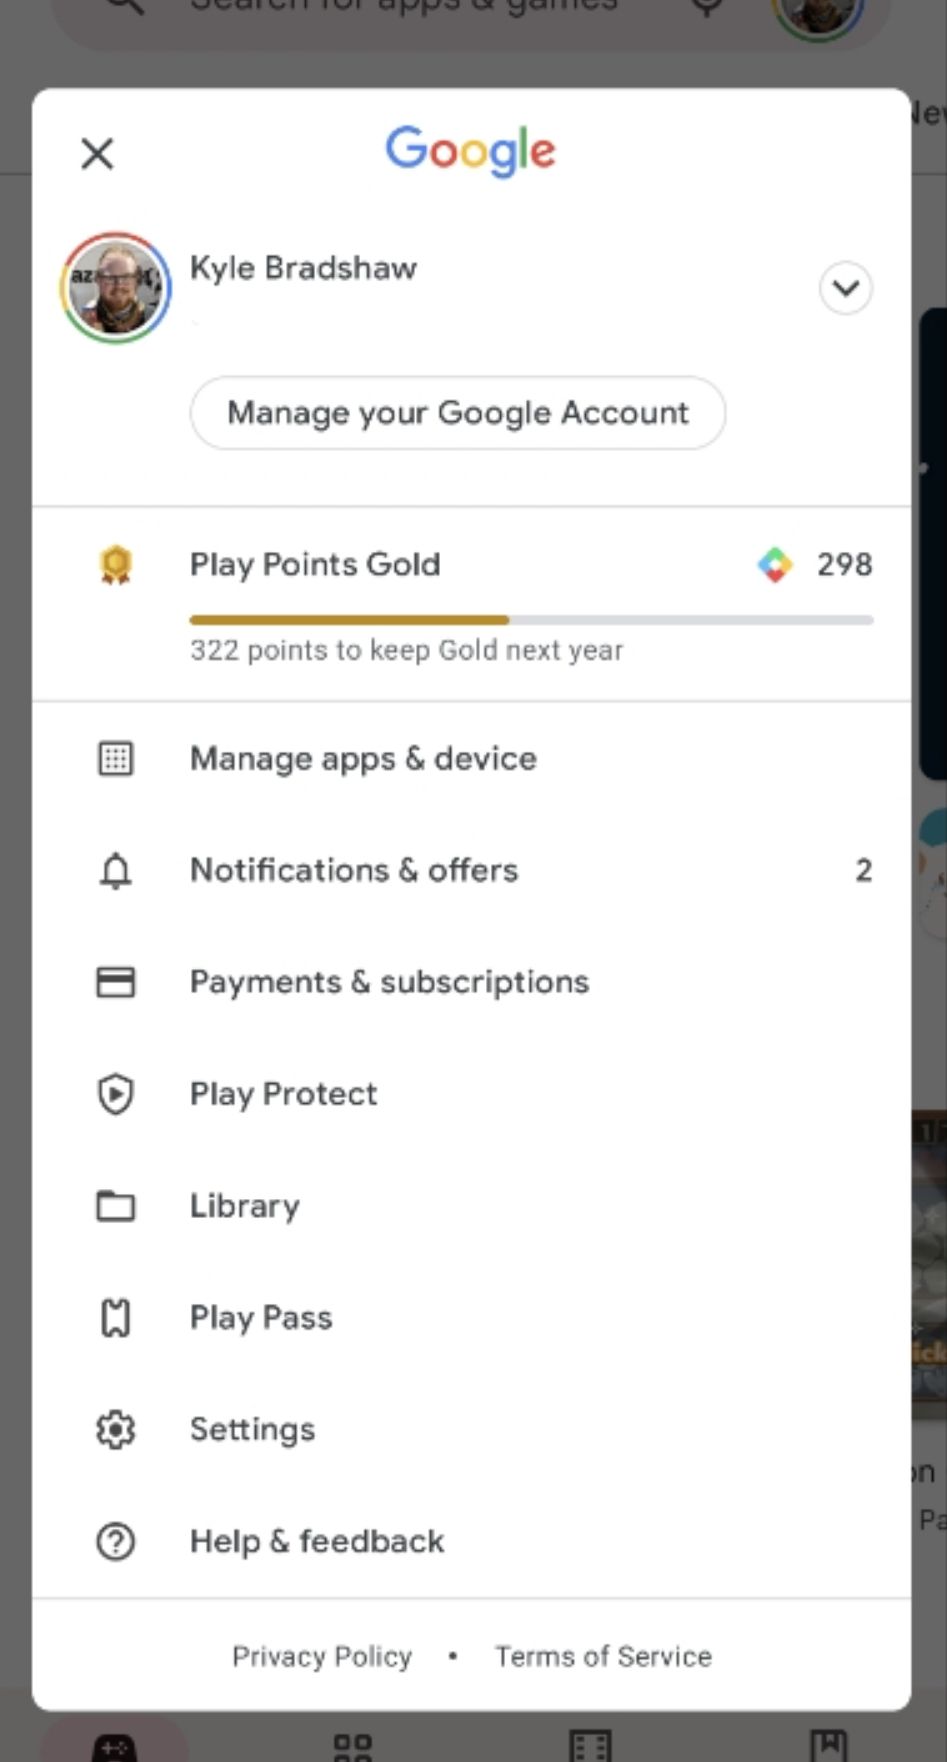 Google's Play System update Google Play System Updates for August, September 2022 Google Play System Update